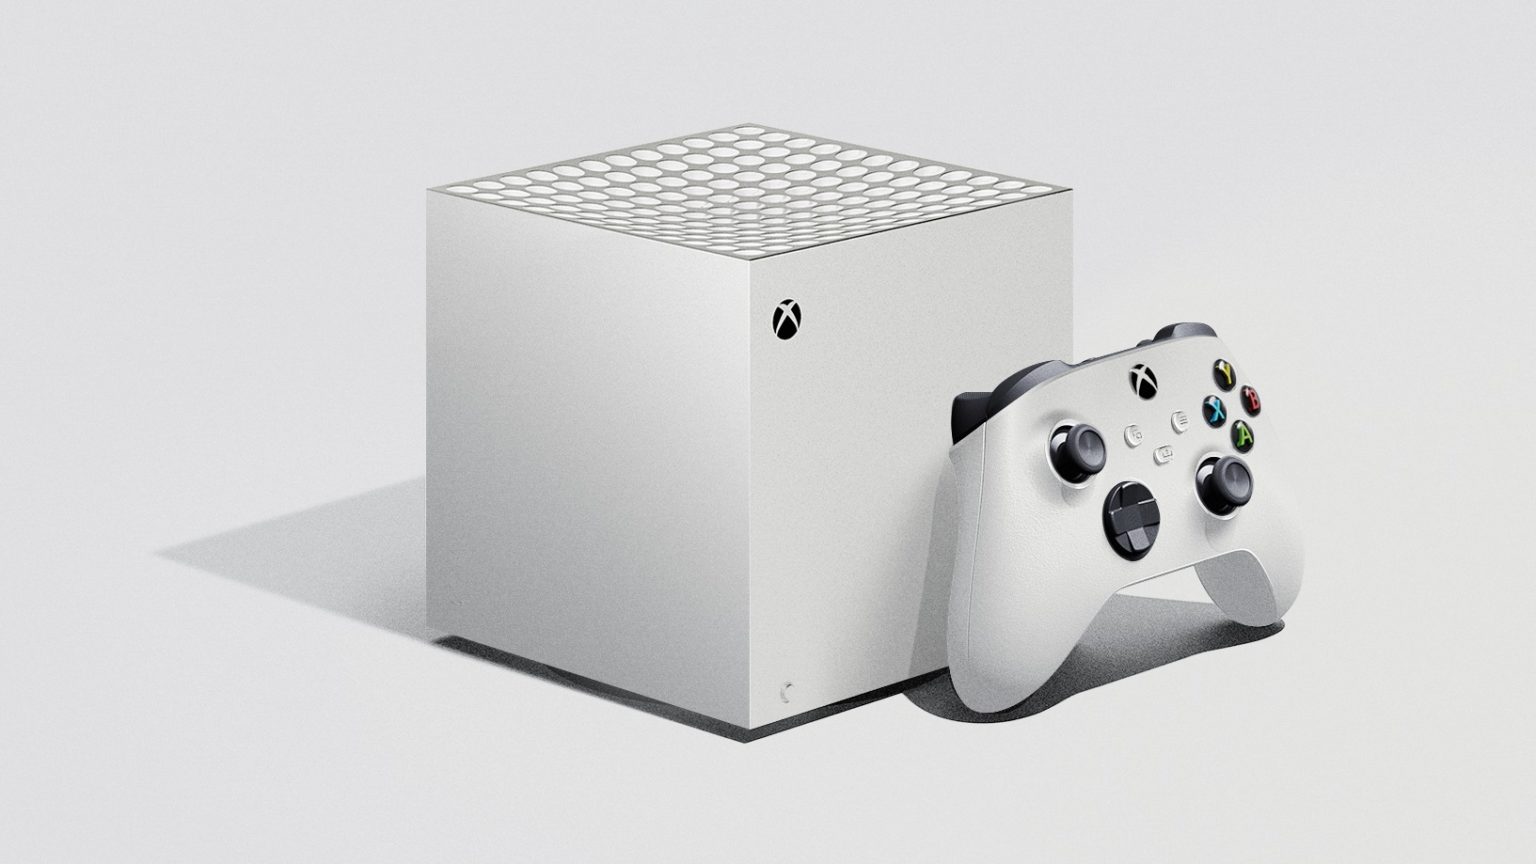 Xbox Series S (Lockhart) Price, specs, release date and what to expect